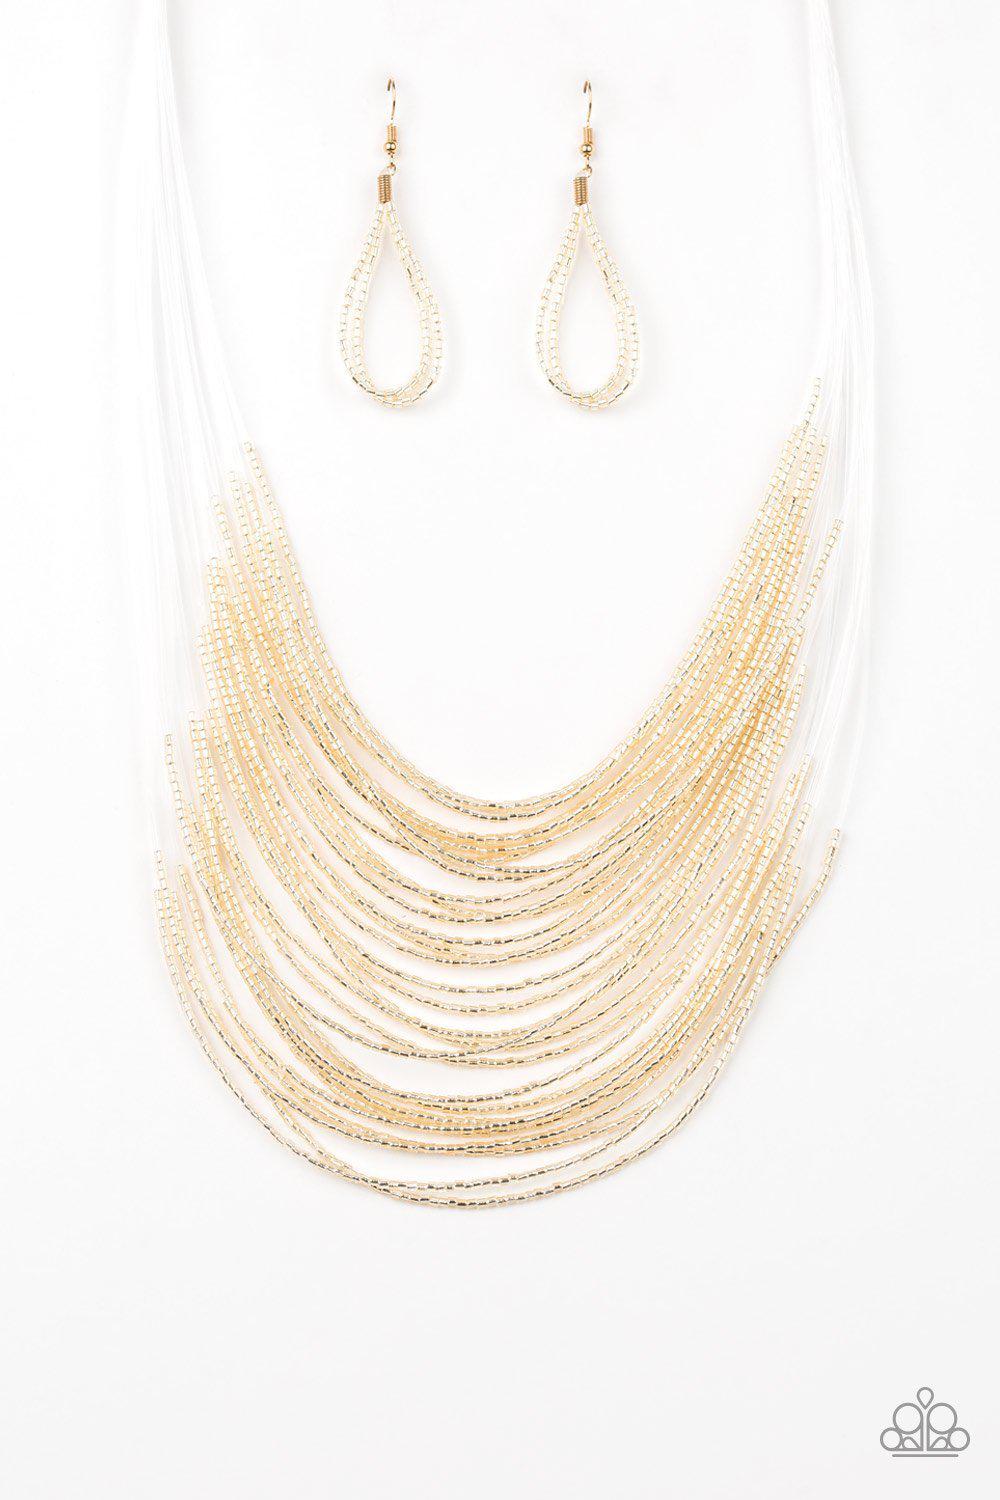 Catwalk Queen Gold Seed Bead Necklace - Paparazzi Accessories-CarasShop.com - $5 Jewelry by Cara Jewels